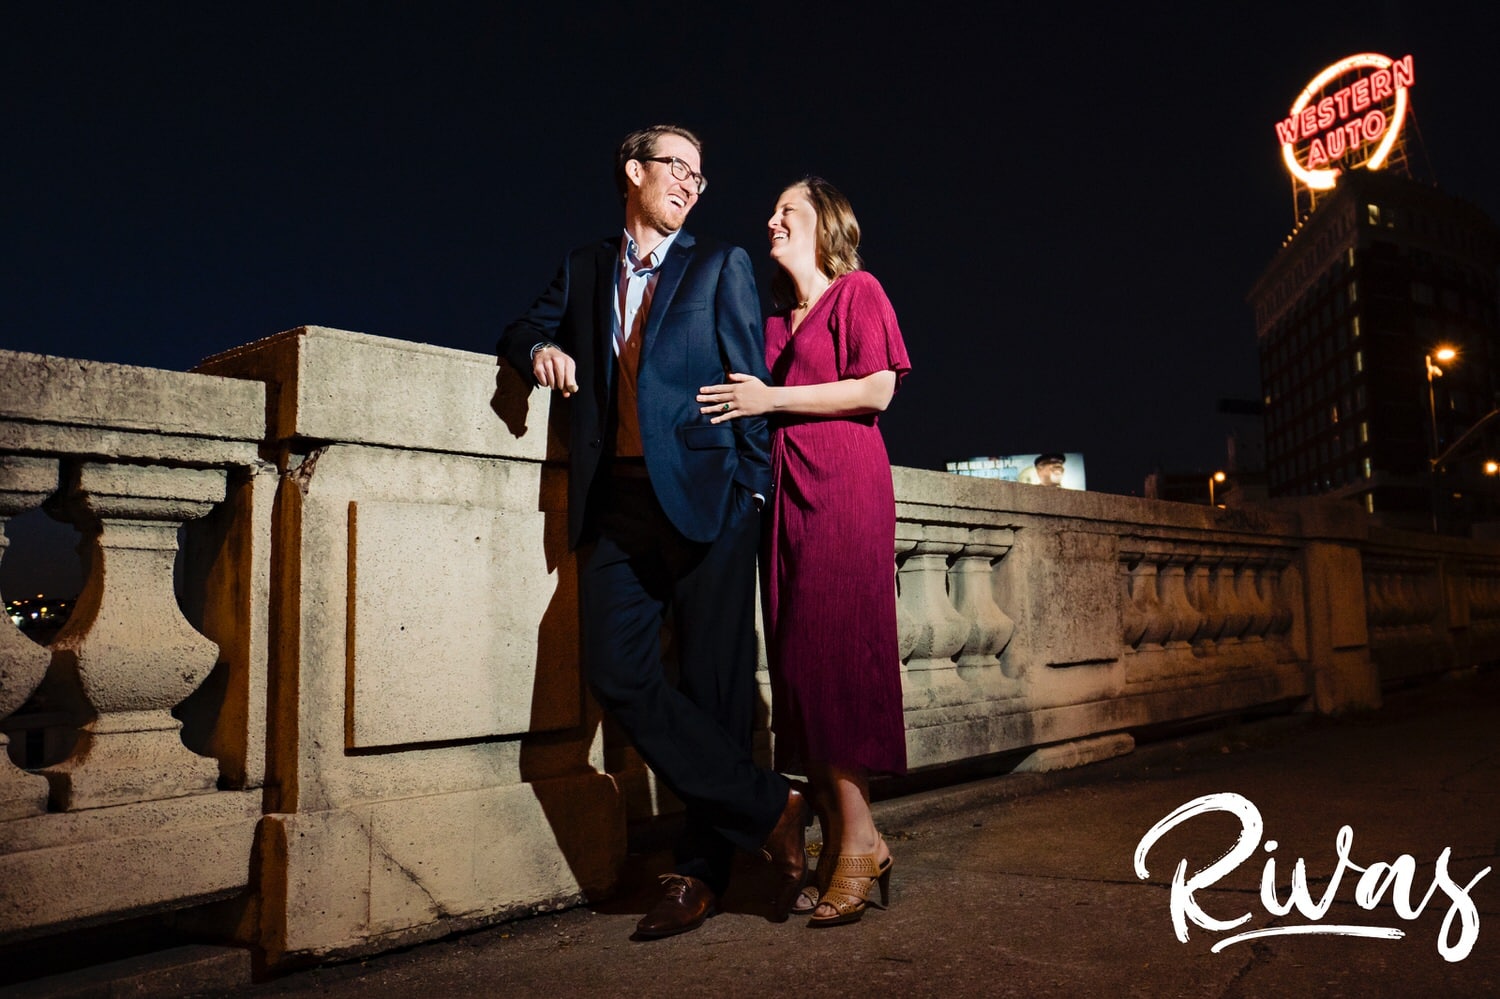 A candid portrait of an engaged couple leaning up against a stone colonnade with the Western Auto sign lit up behind them during their Kansas City engagement session. 